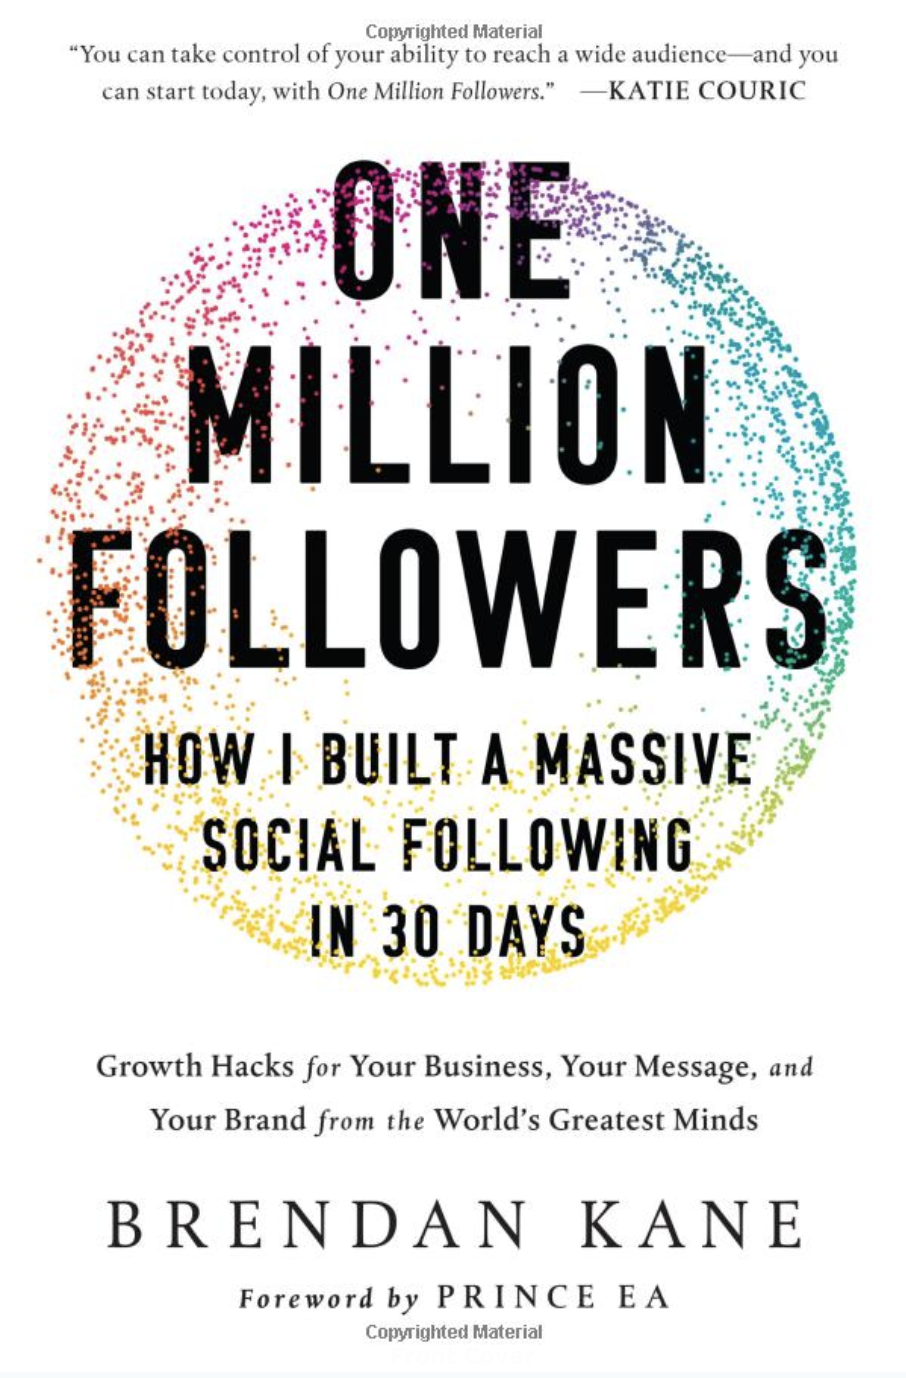 One Million Followers Top Blogging Book to Read This Year